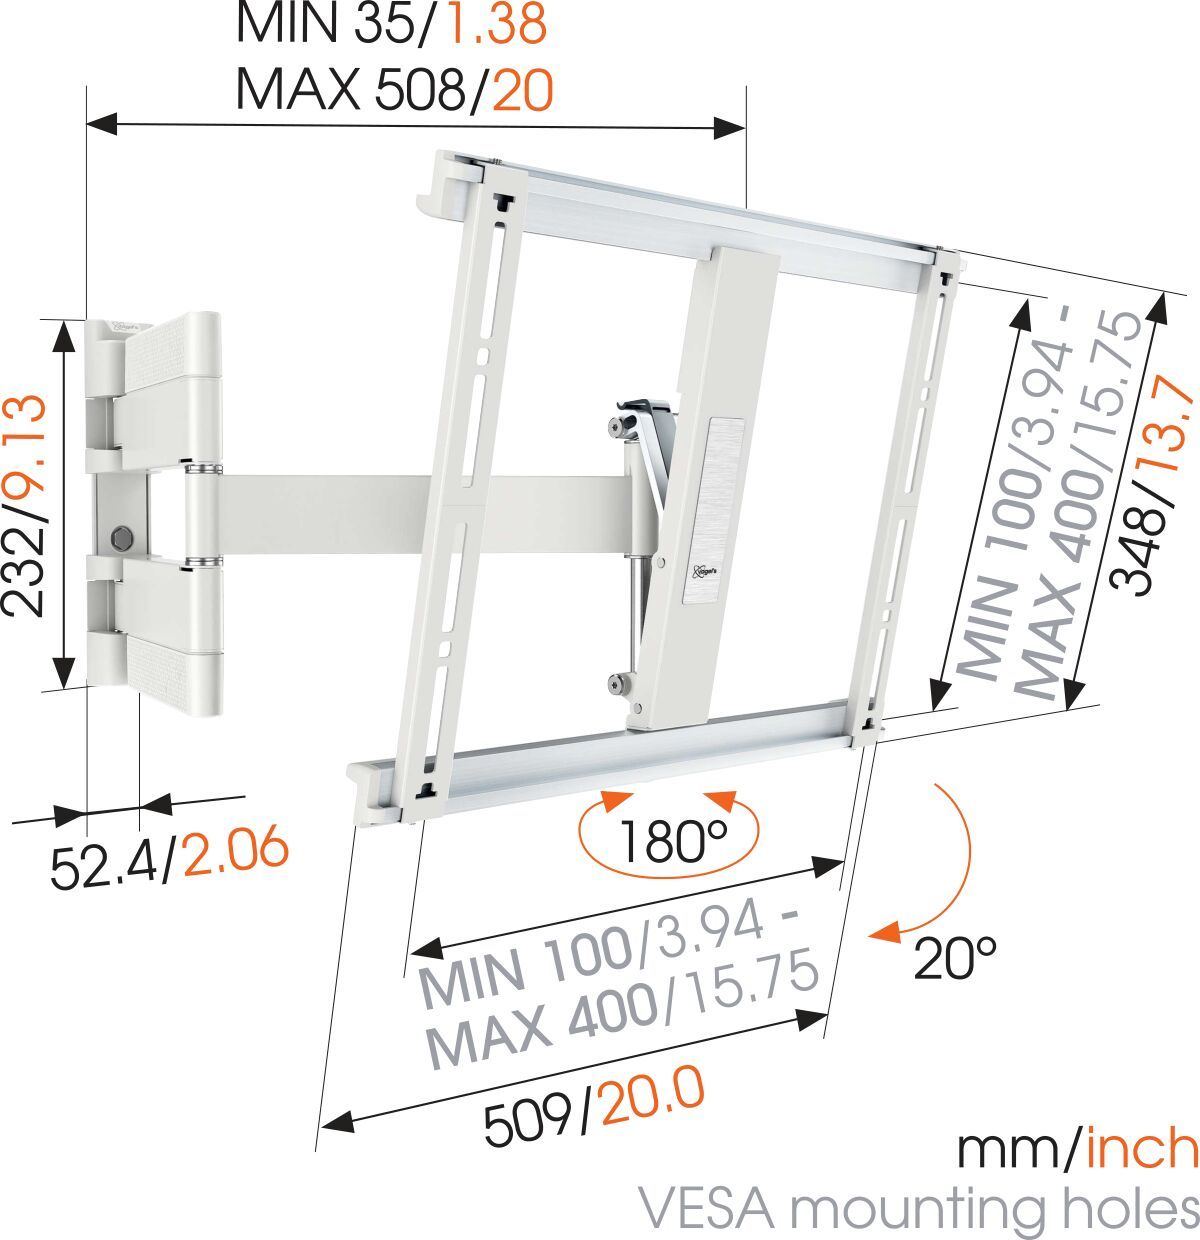 Vogel's THIN 445 ExtraThin Full-Motion TV Wall Mount (white) - Suitable for 26 up to 55 inch TVs - Full motion (up to 180°) - Tilt up to 20° - Dimensions